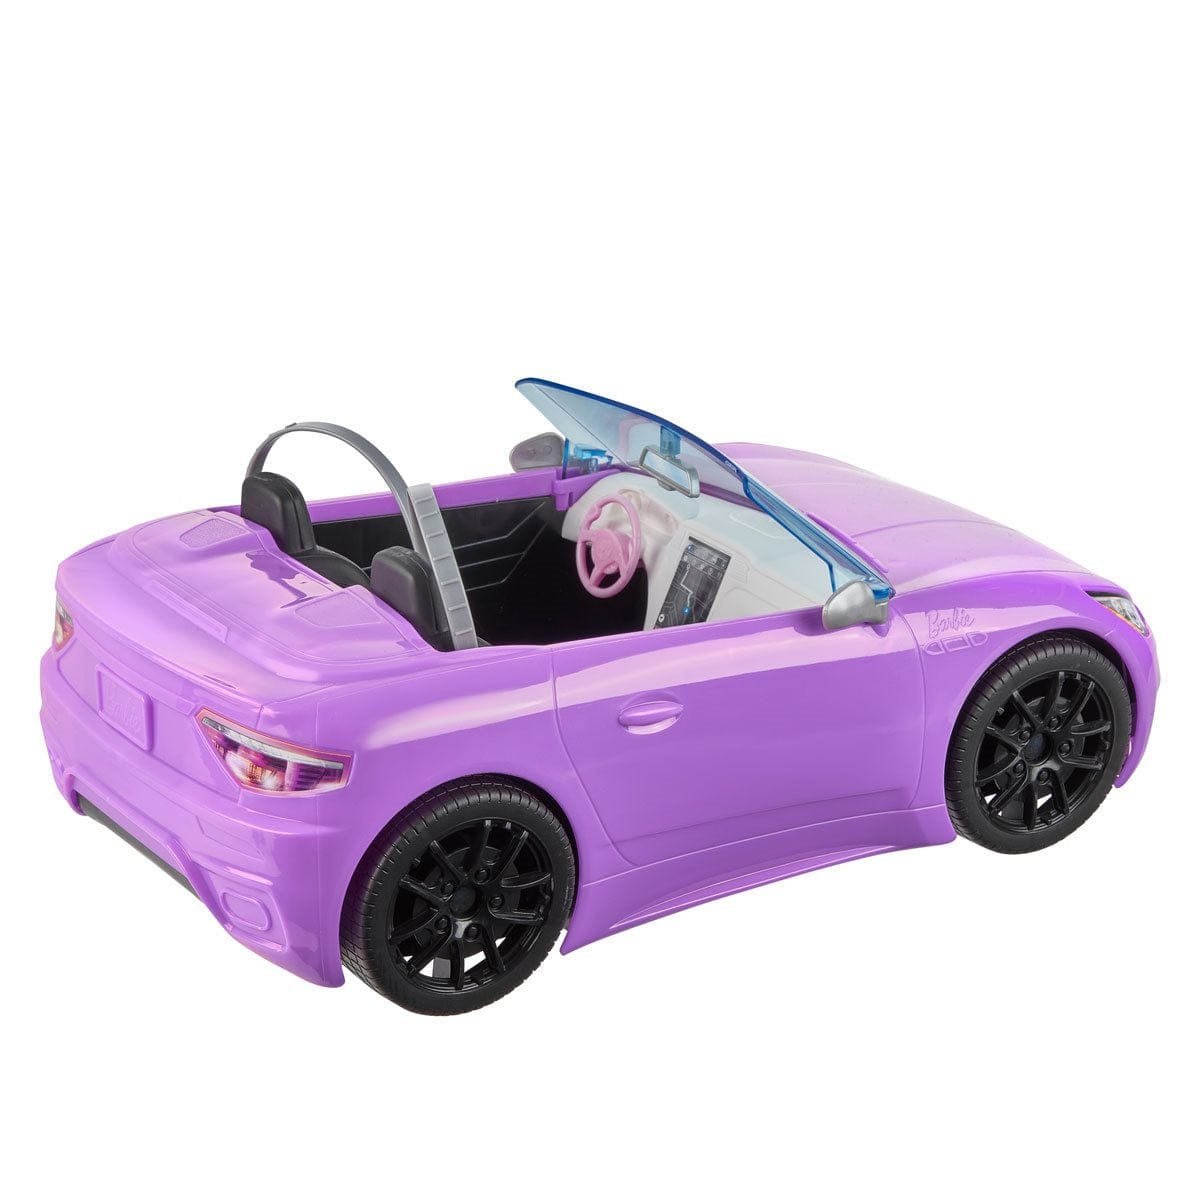 Barbie Convertible Toy Car, Sparkly Pink 2-Seater Cote dIvoire